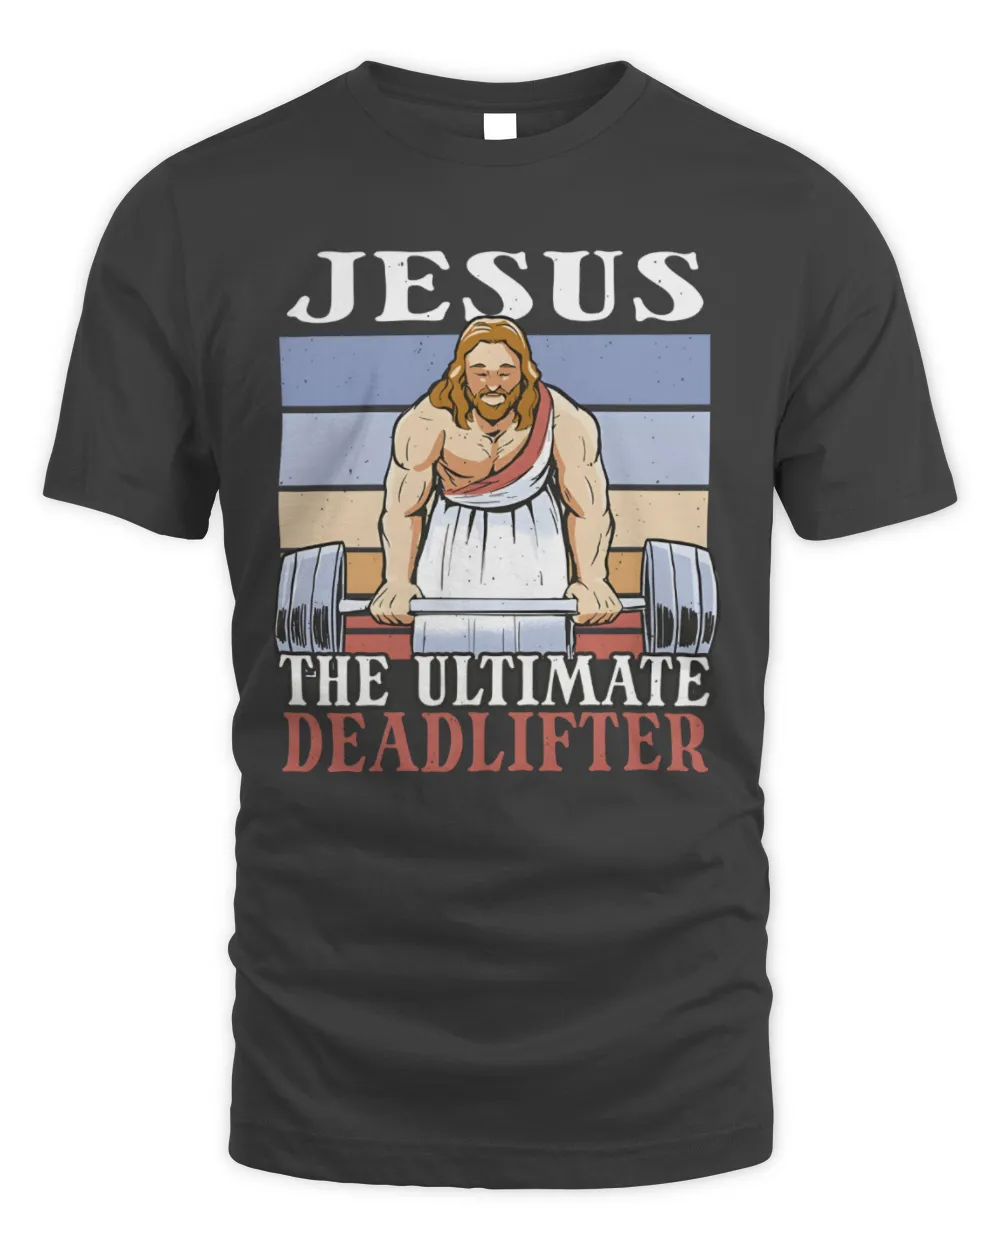 Funny Jesus The Ultimate Deadlifter Shirt, Deadlifter Jesus Tee, Weightlifting Jesus Shirt, Jesus Weightlifting Tee, Offensive Jesus Tee